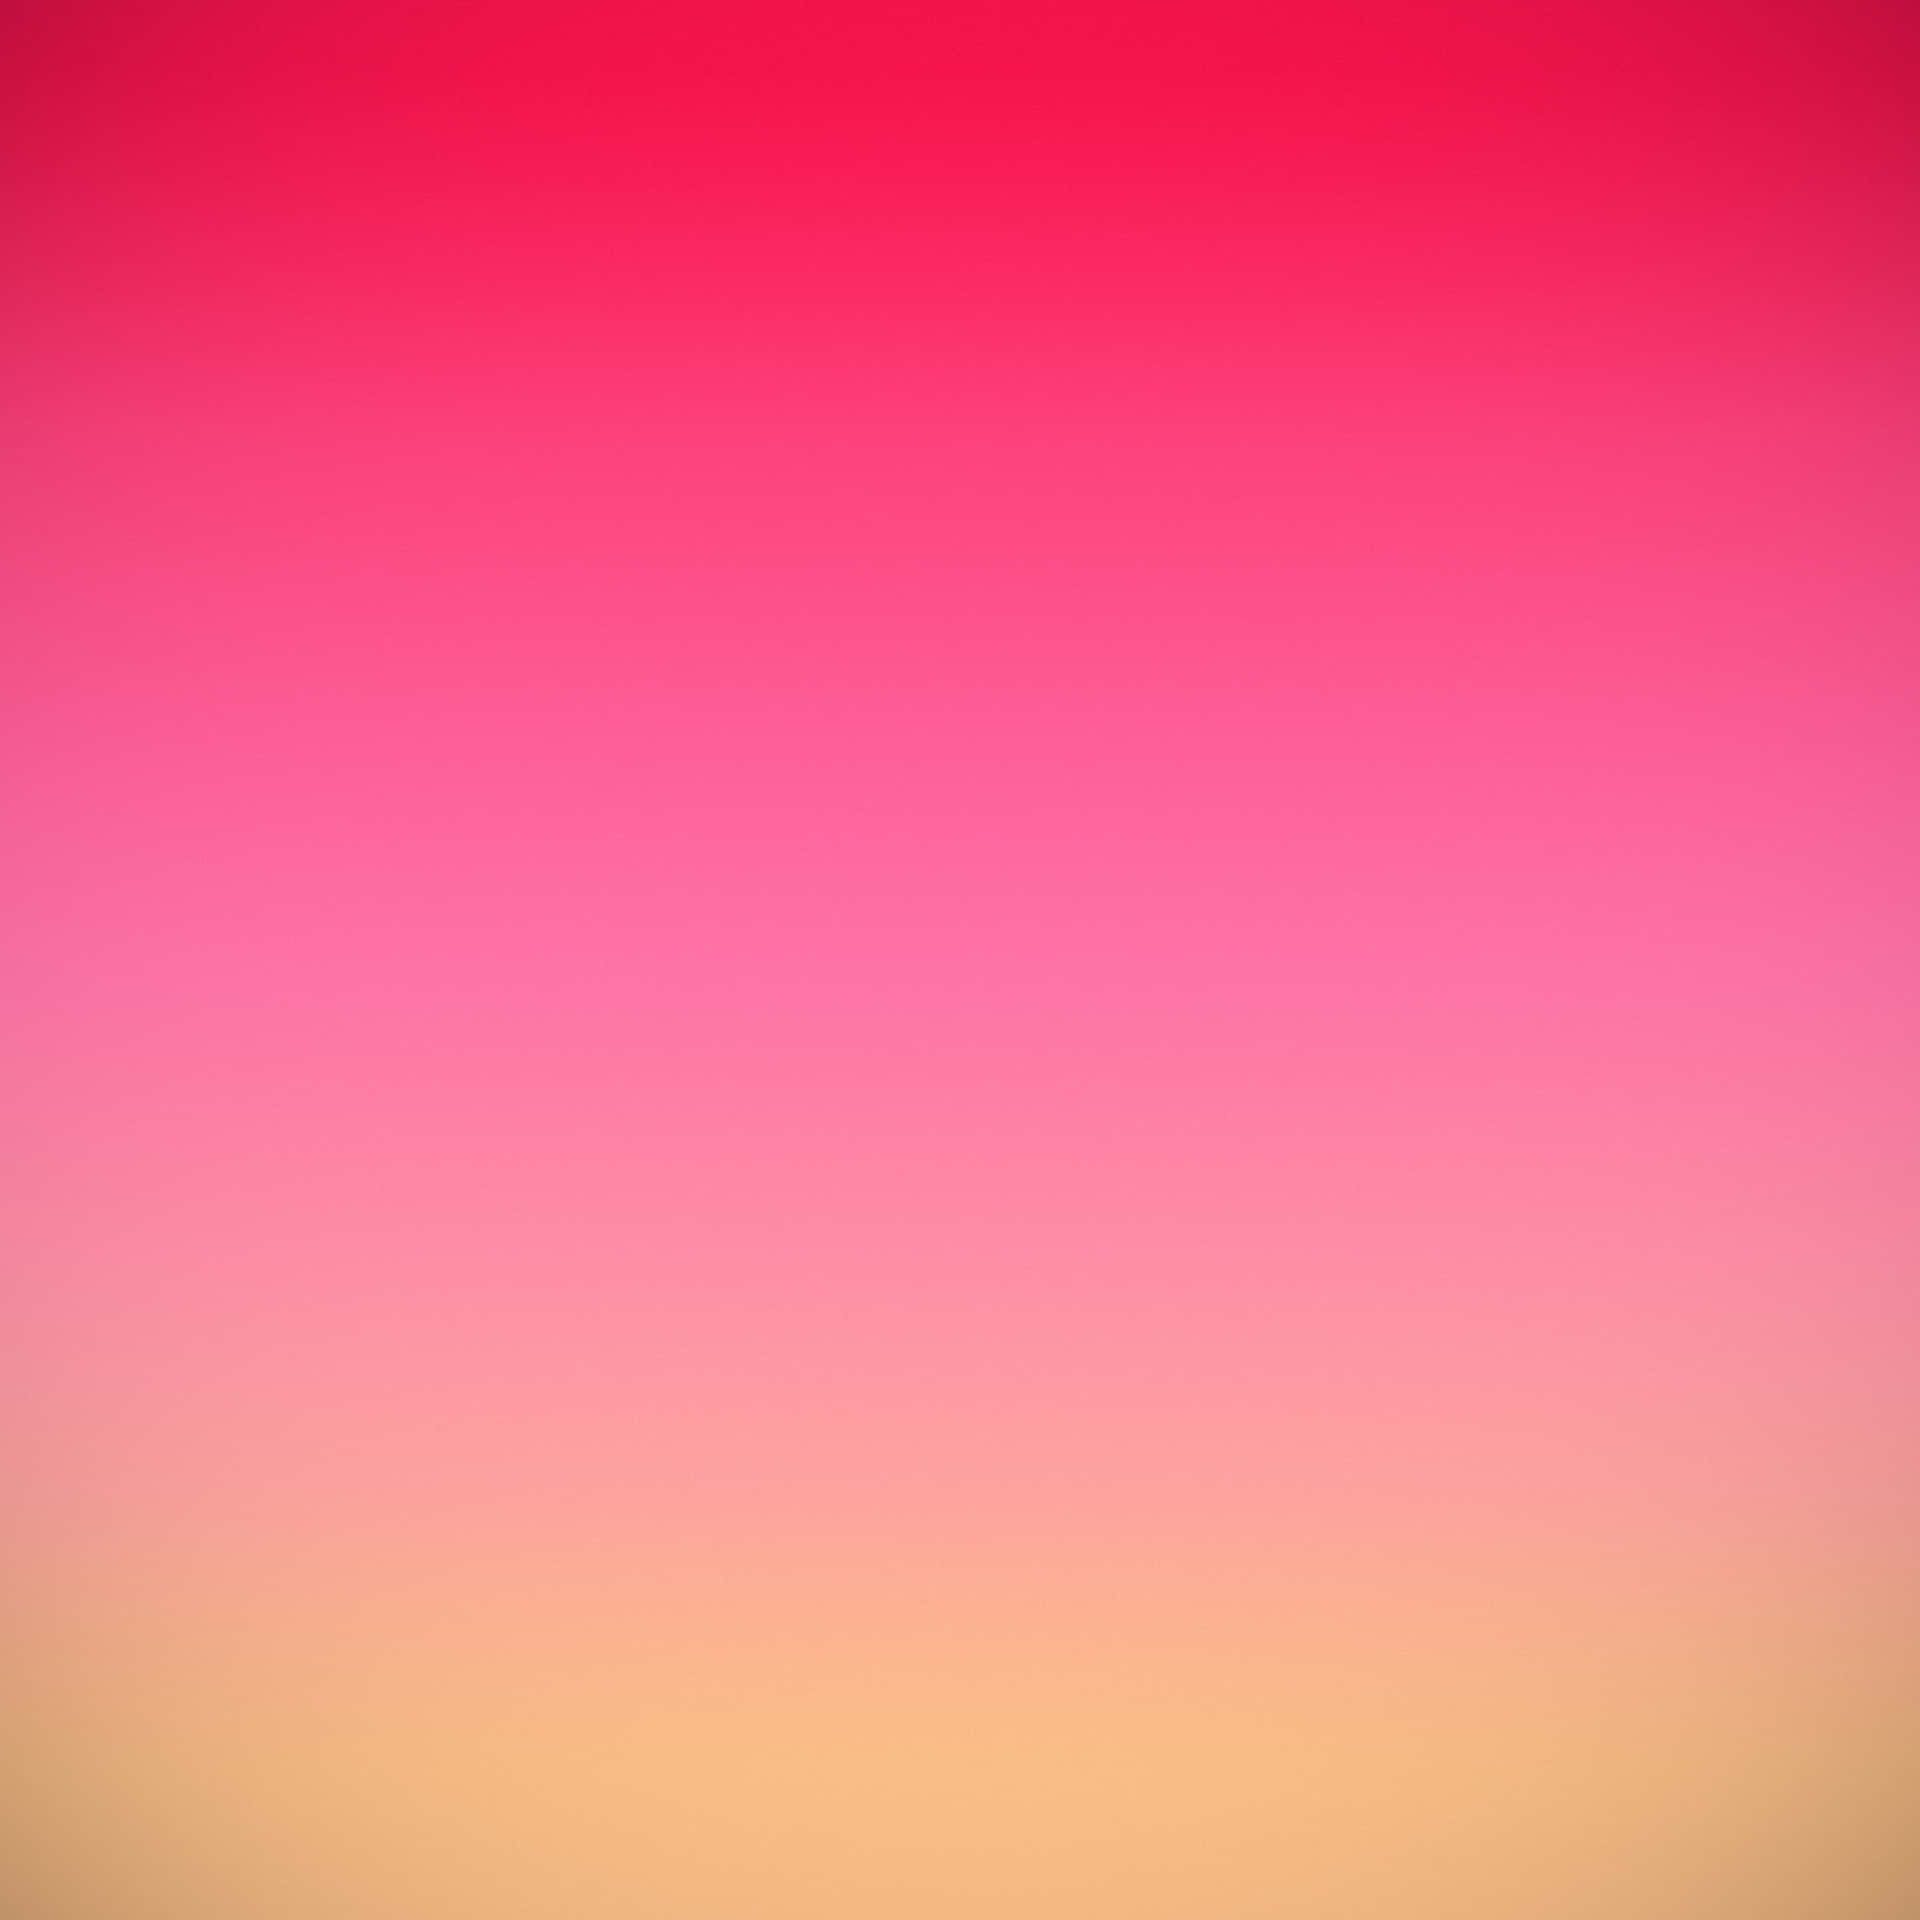 A Pink And Yellow Gradient Background Background